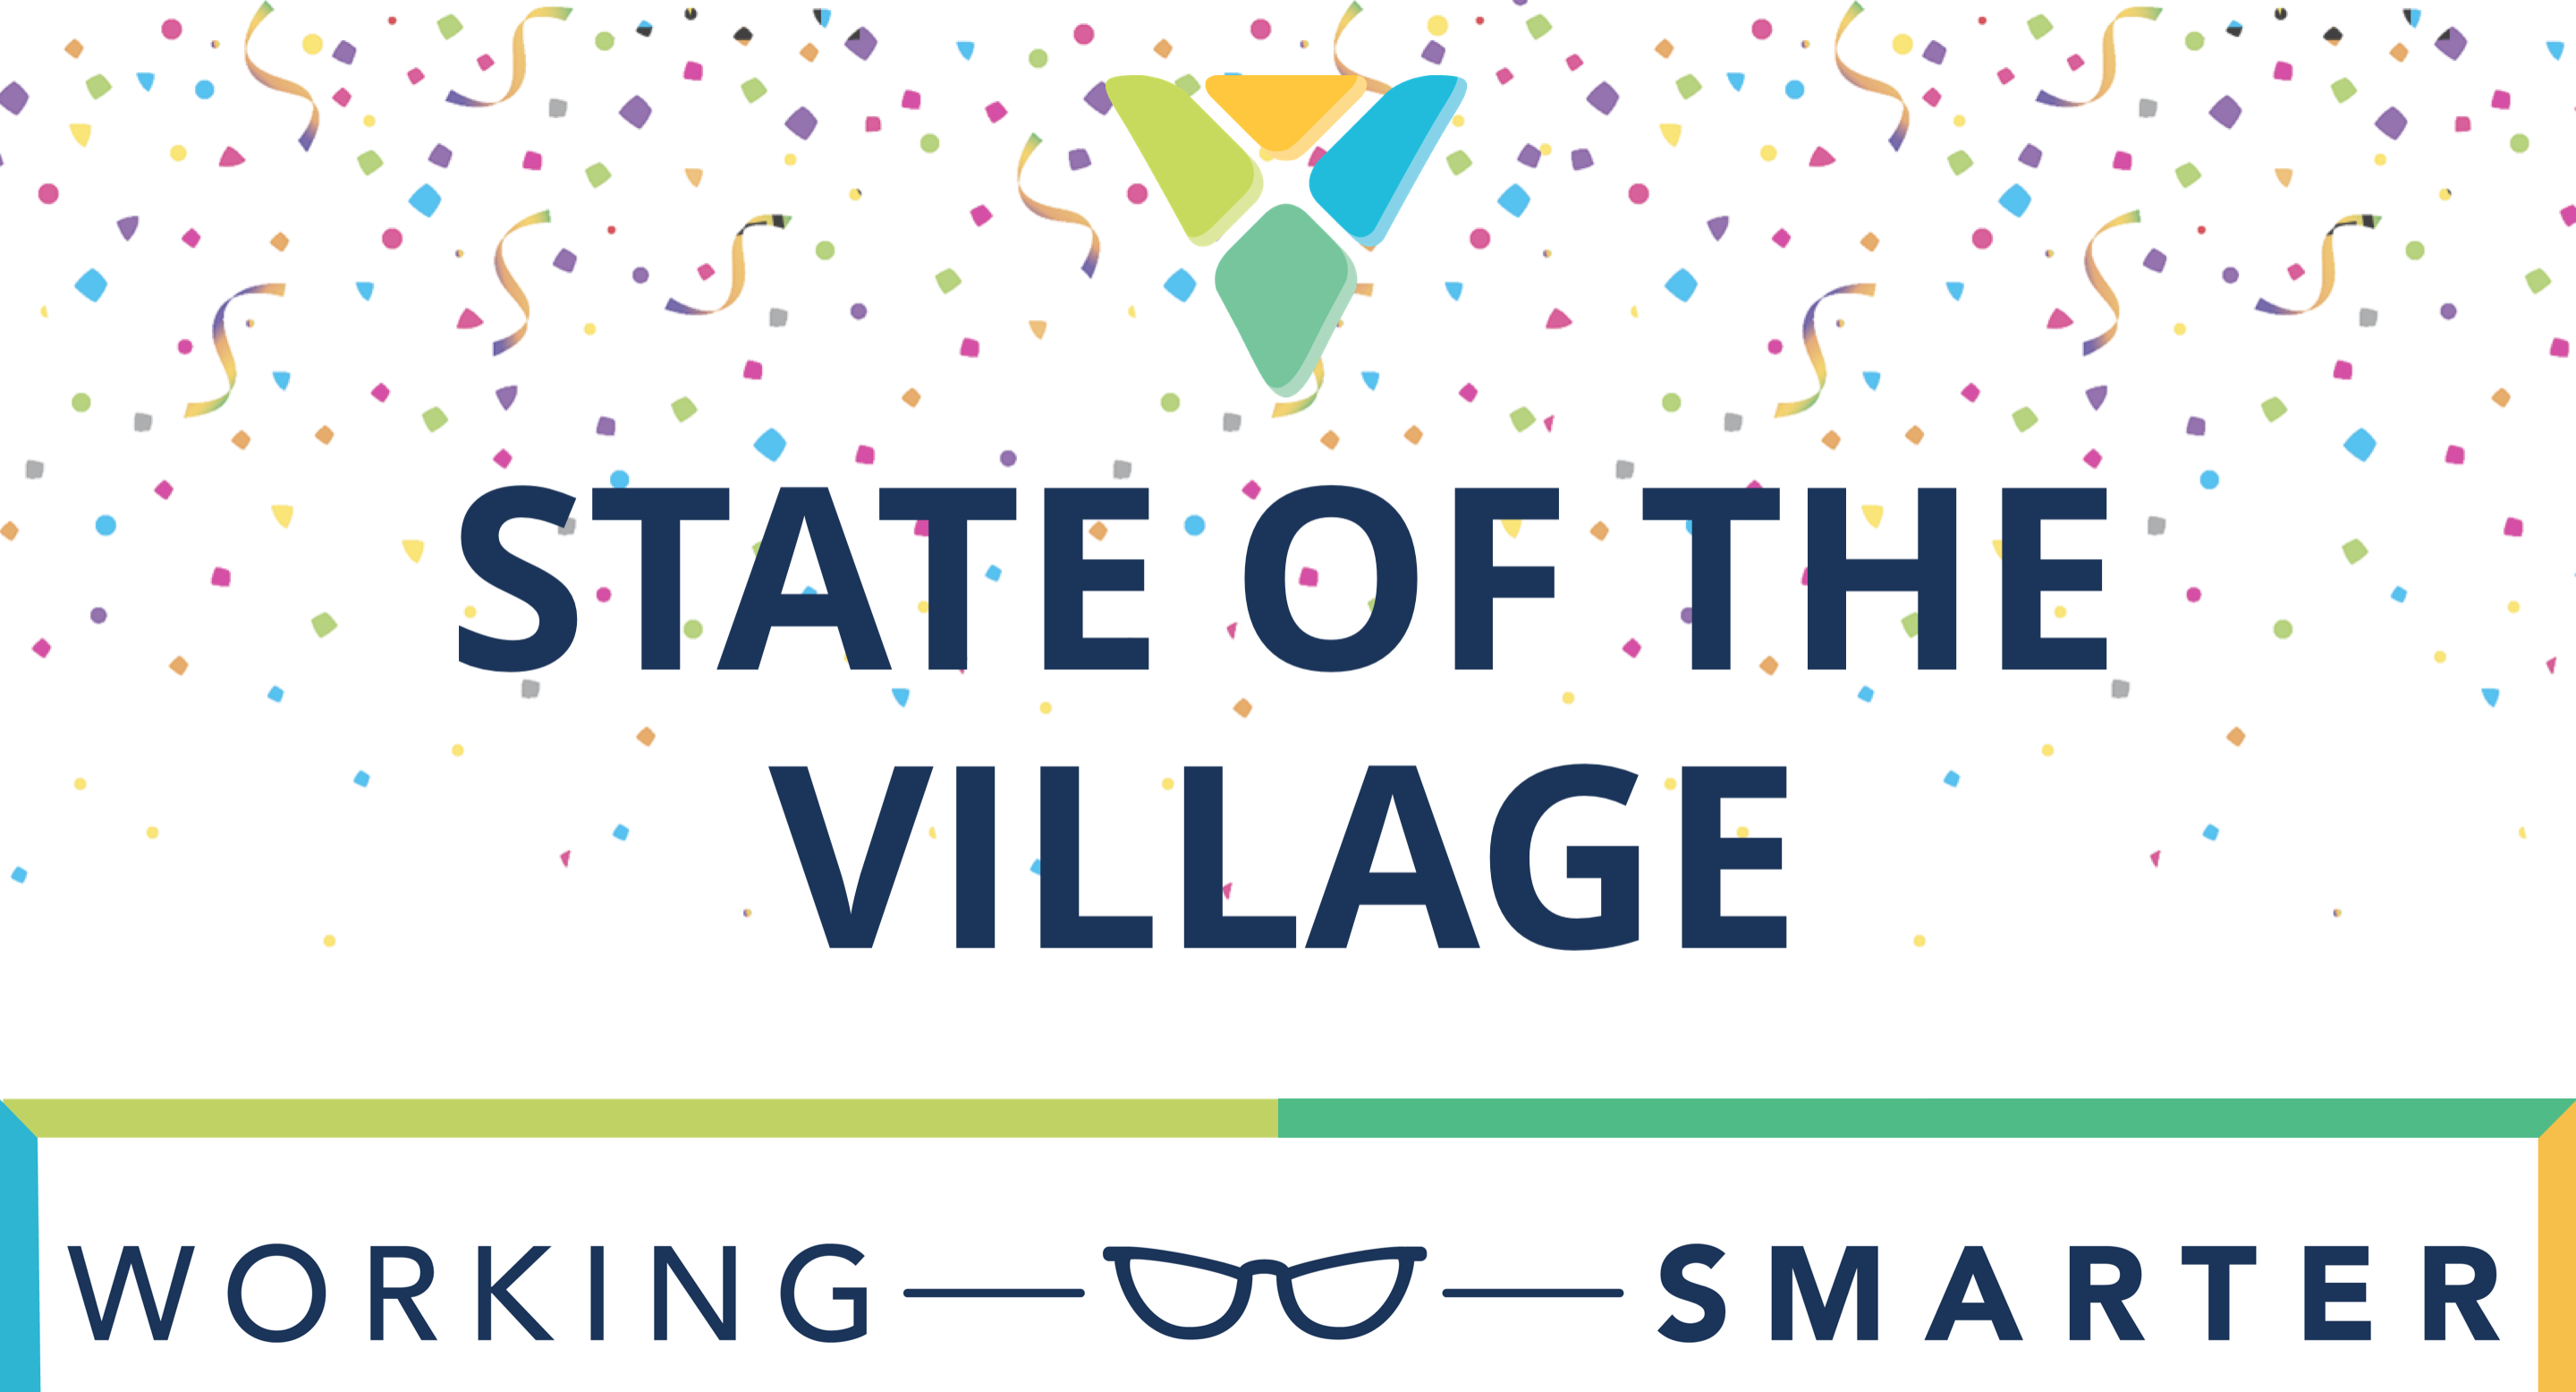 Working Smarter: State of the Village